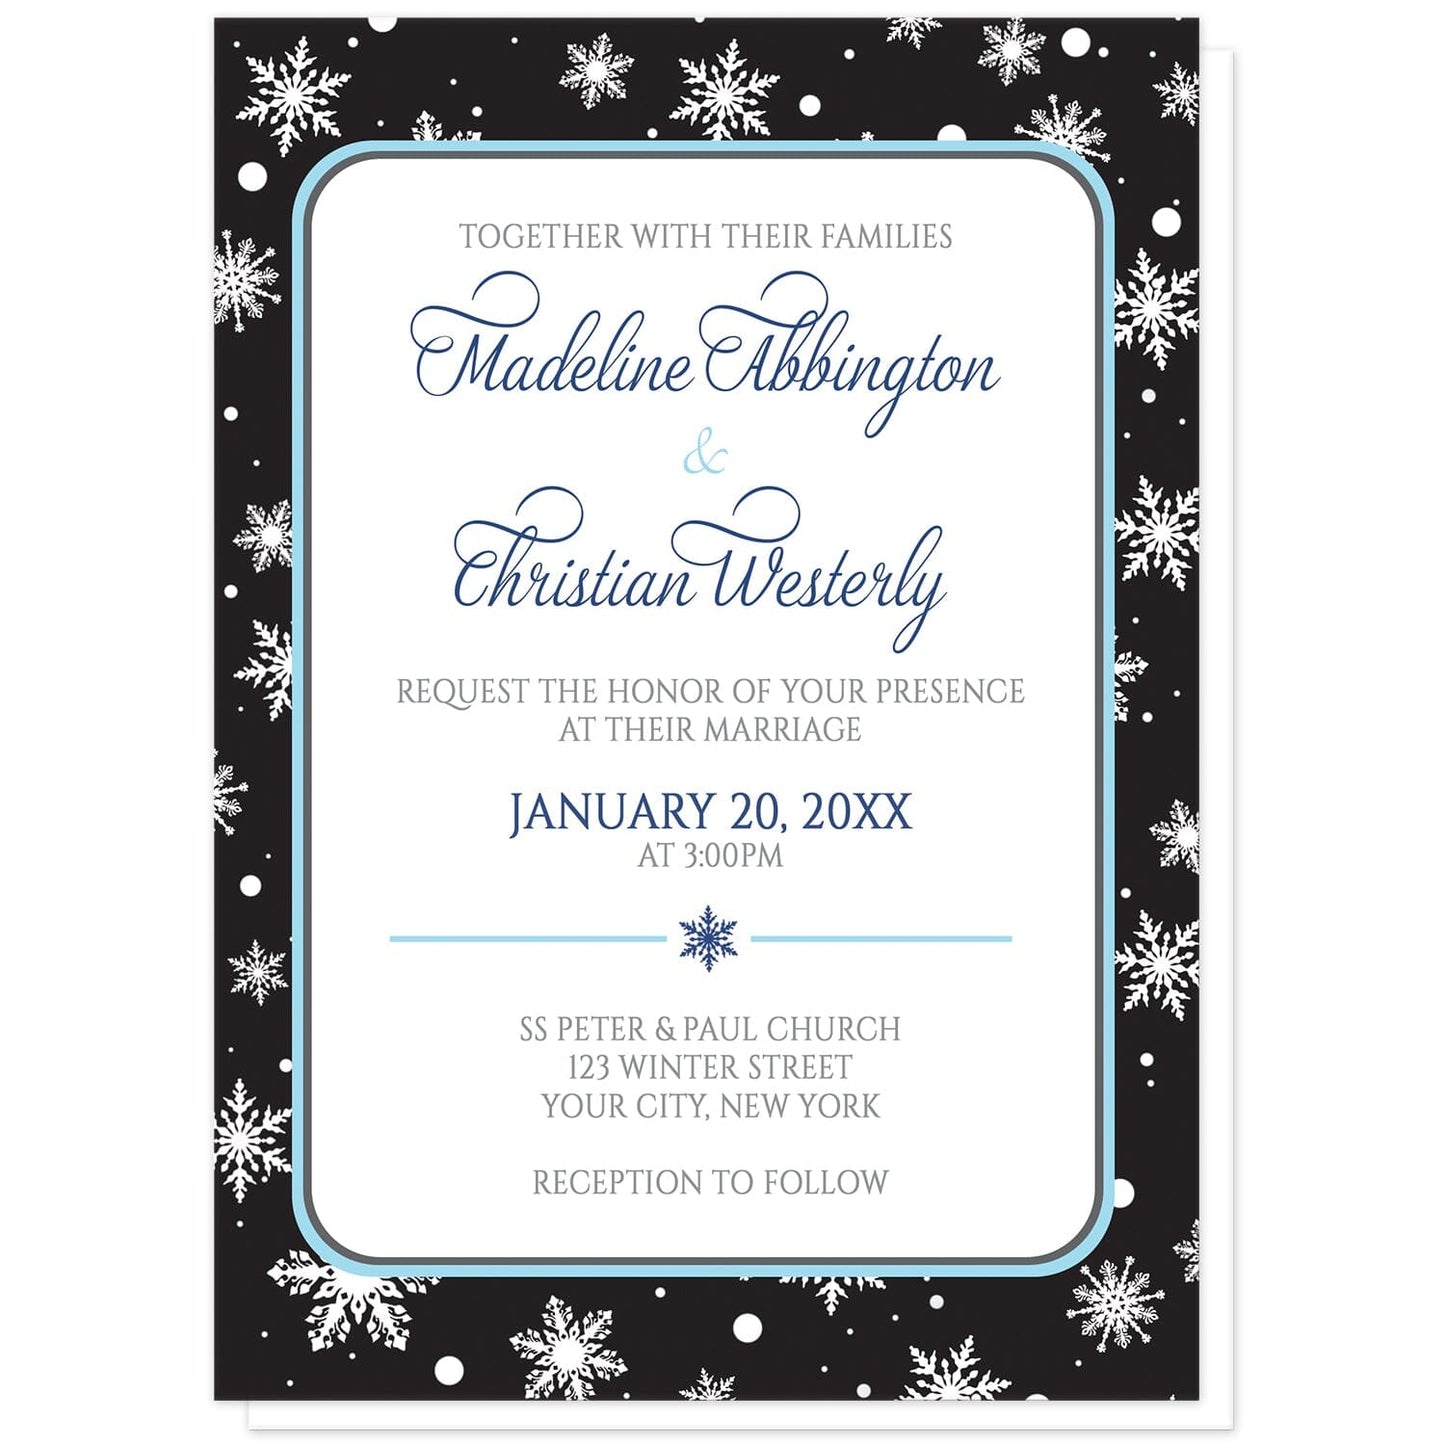 Midnight Snowflake Winter Wedding Invitations at Artistically Invited. Midnight snowflake winter wedding invitations with white snowflakes over a black background. Your personalized marriage details are custom printed in navy blue, aqua blue, and medium gray over a white rectangular area outlined in aqua and navy blue.